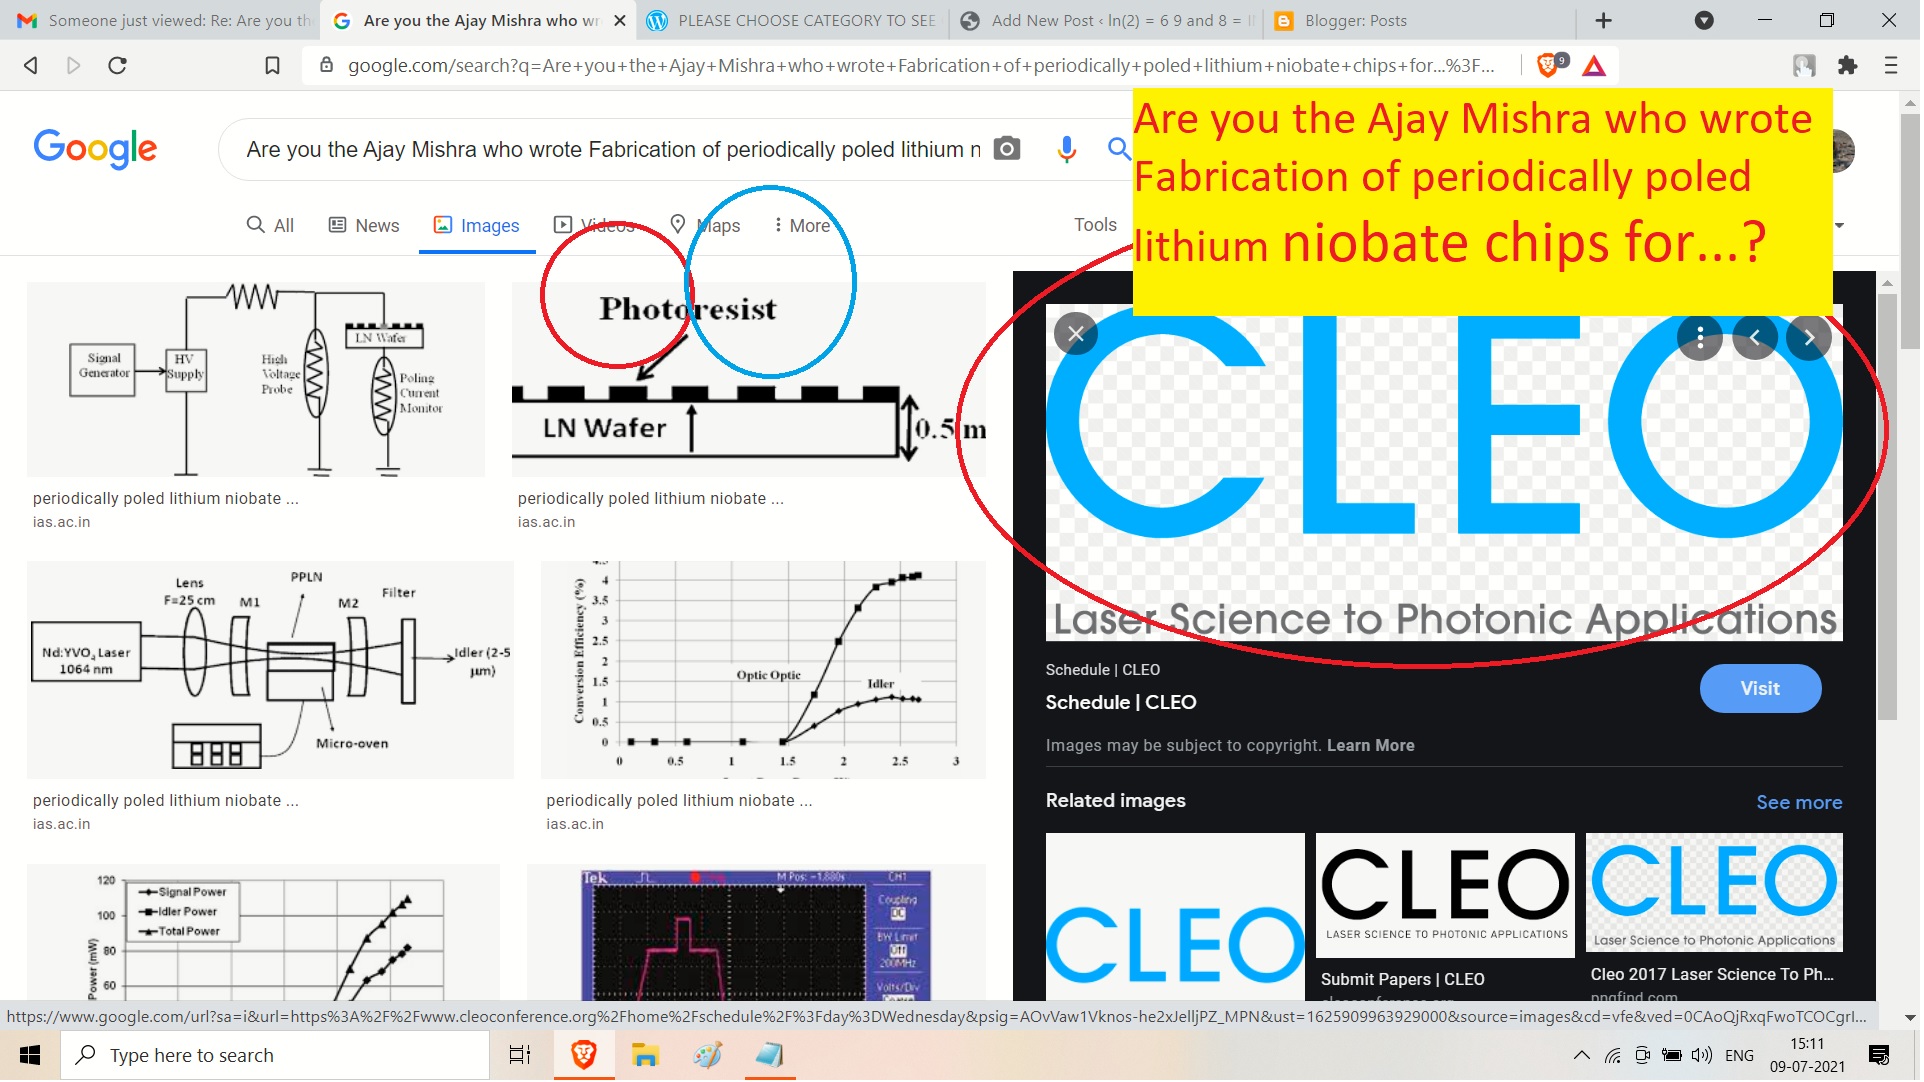 Are you the Ajay Mishra who wrote Fabrication of periodically poled lithium niobate chips for.